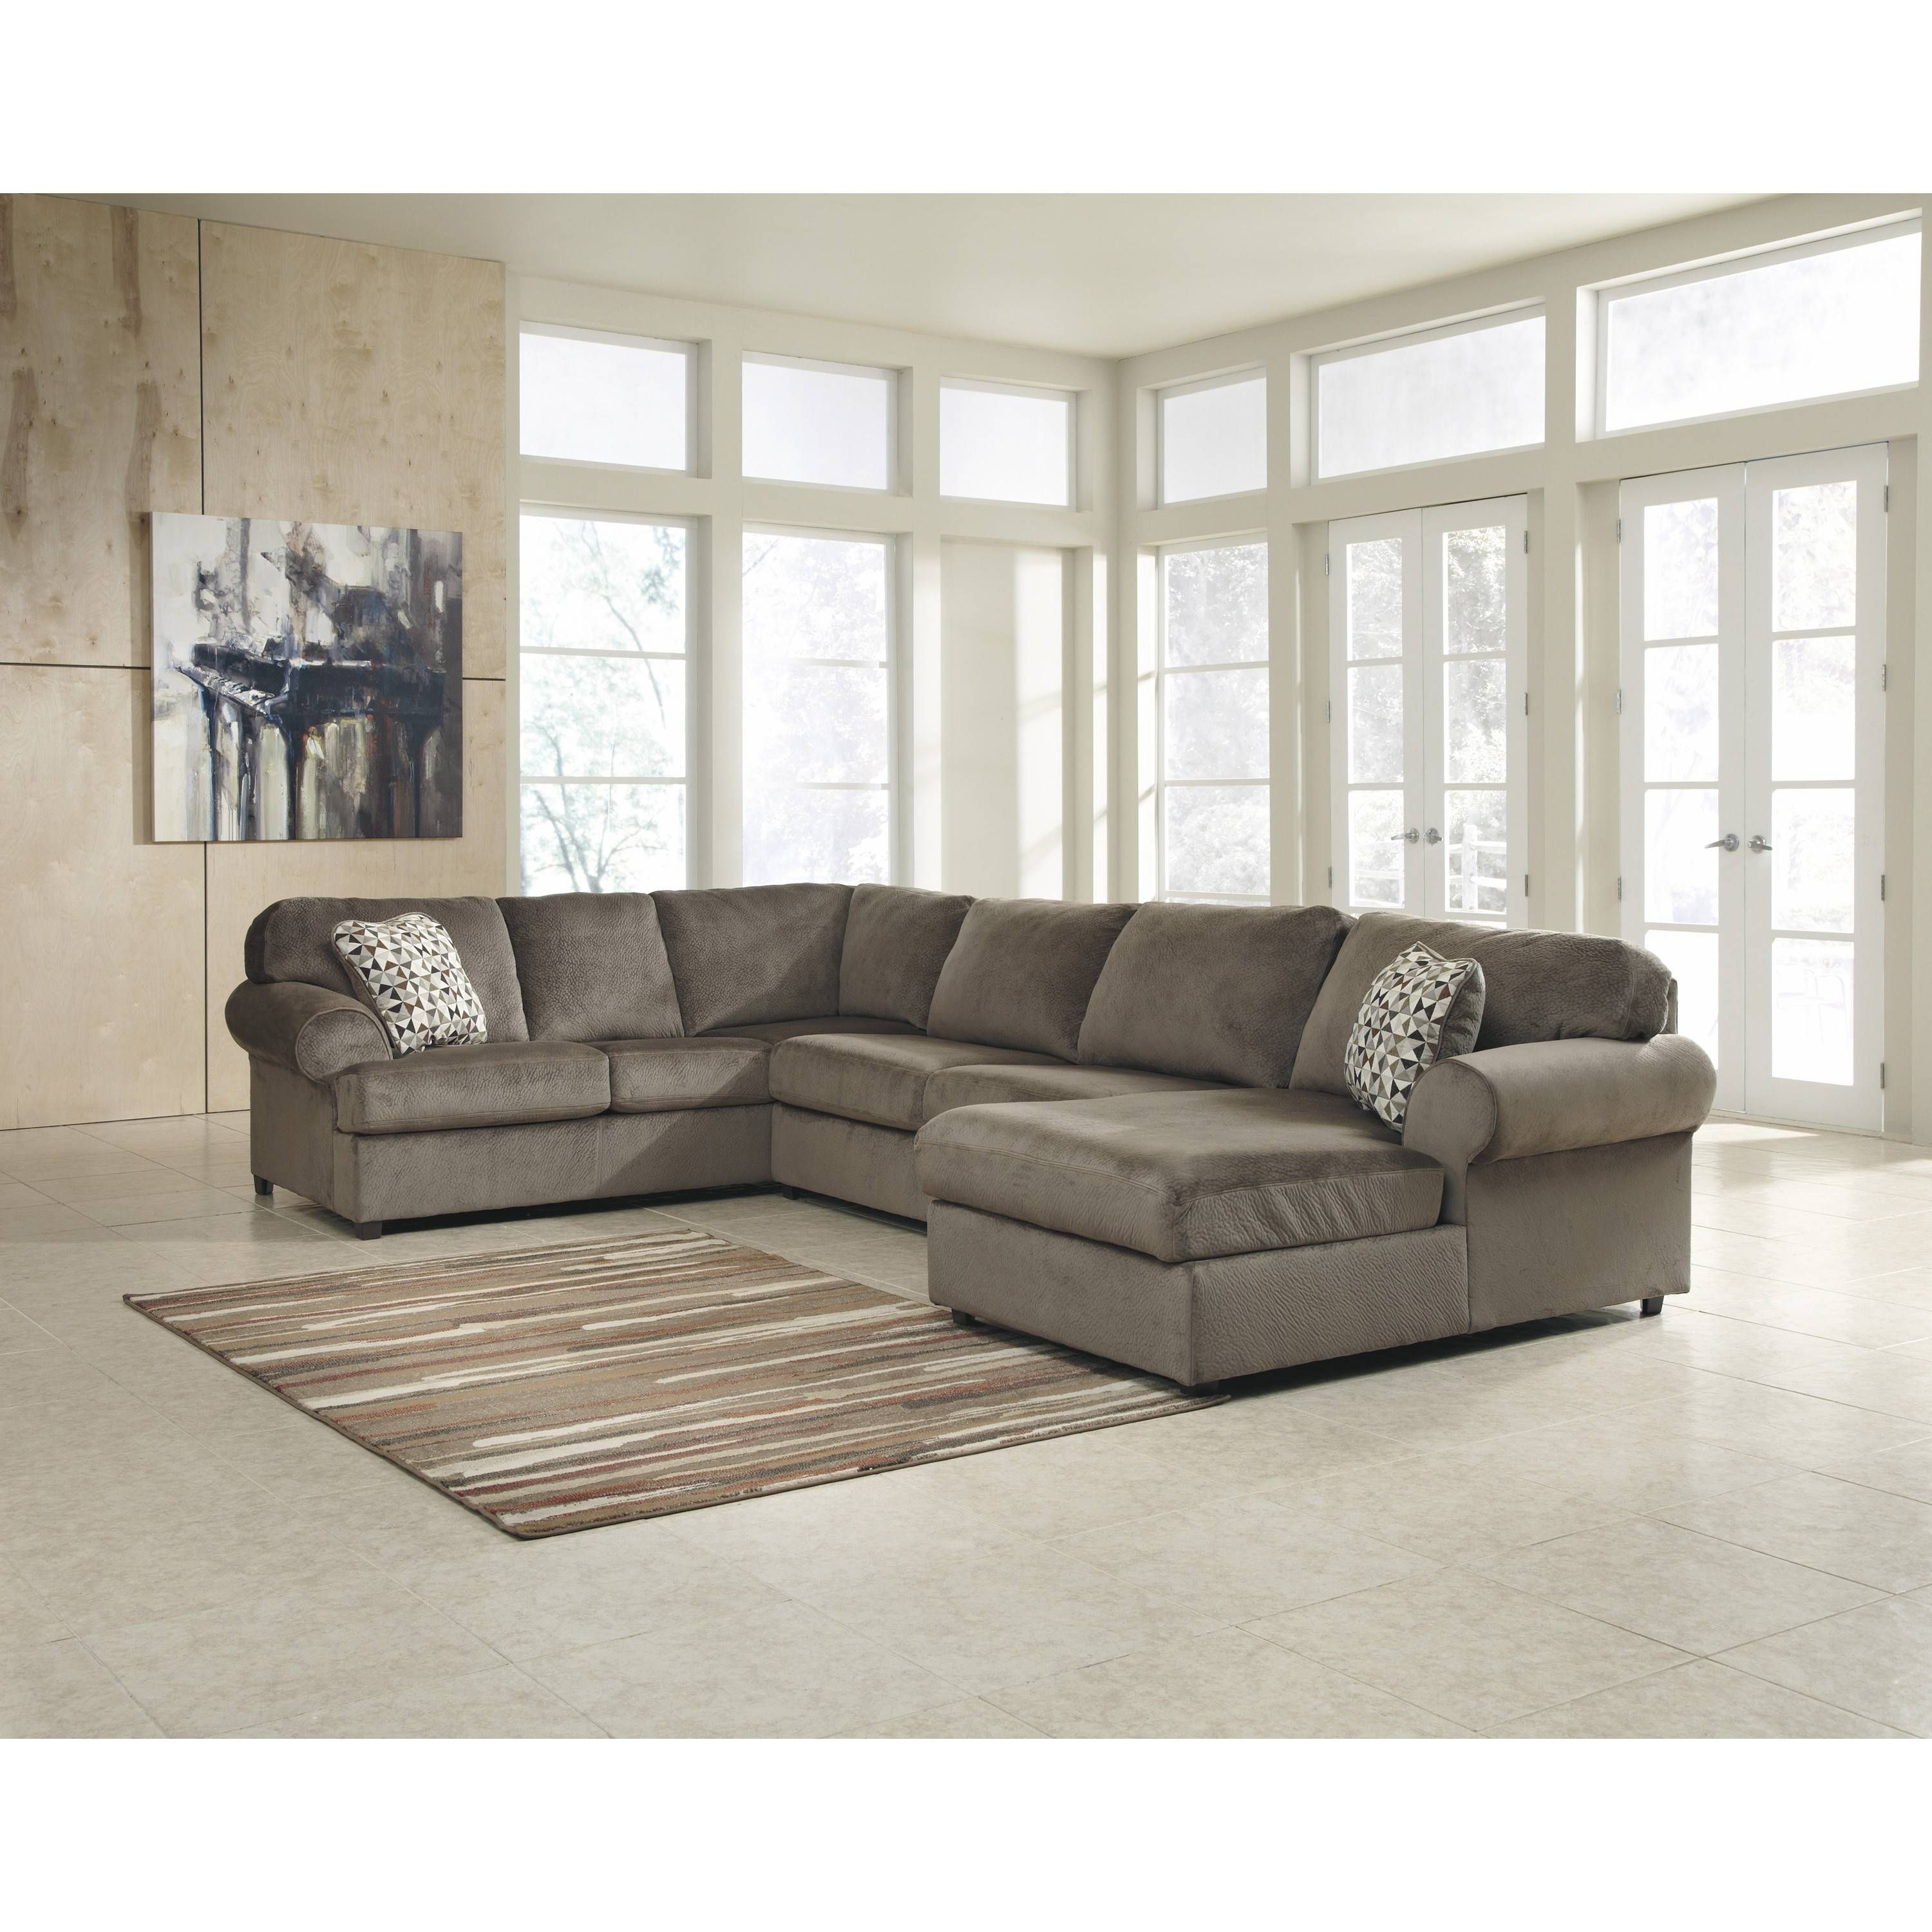 Amusing C Shaped Sectional Sofa 60 On Sectional Sofas Under 1000 Regarding C Shaped Sofas (View 26 of 30)